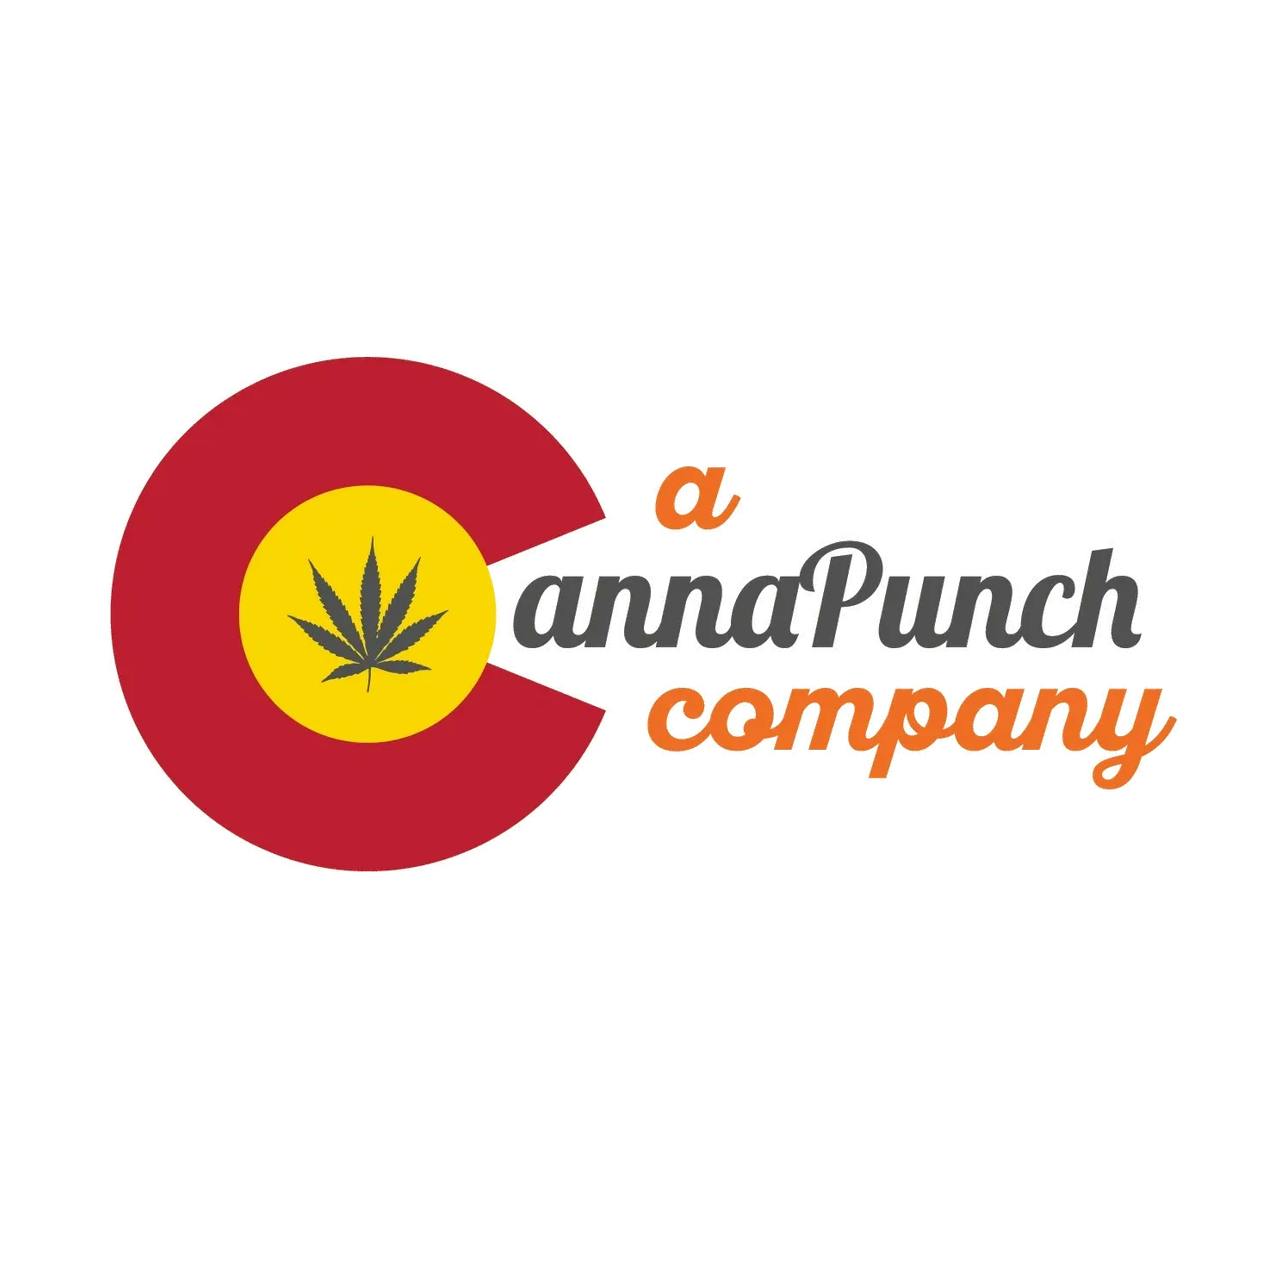 CannaPunch